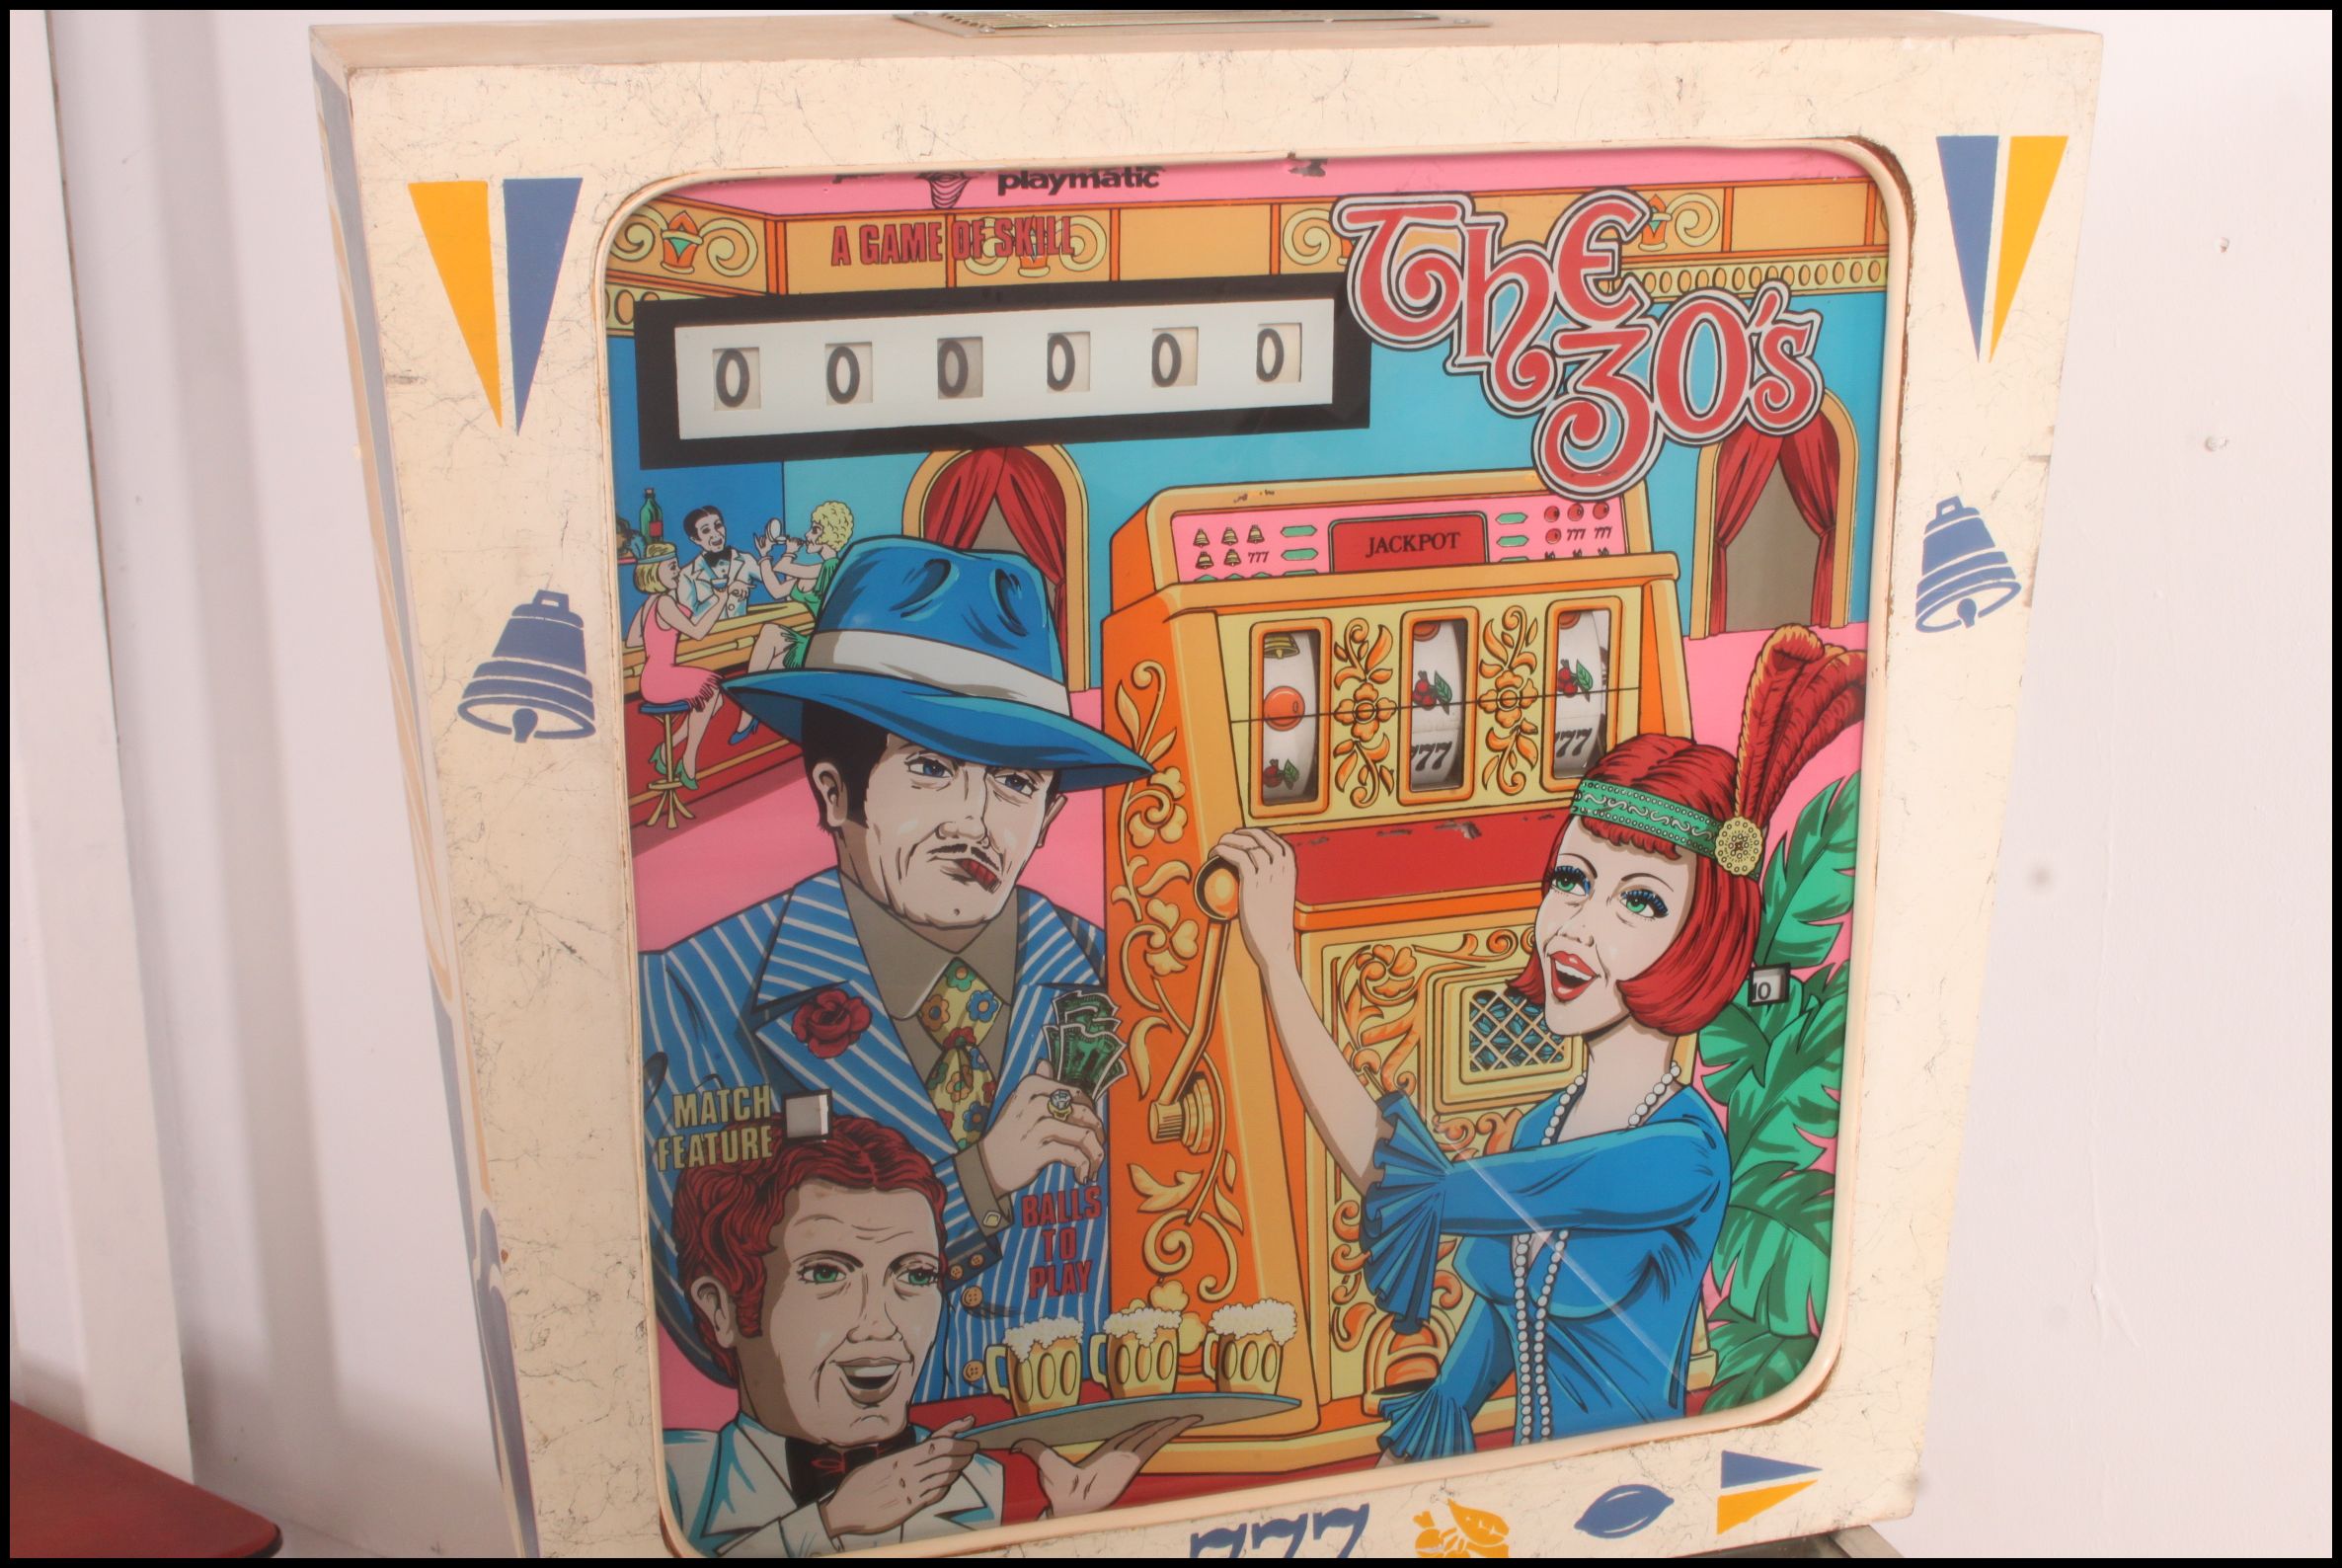 A 1977 Playmatic 777 ' The 30's ' Pinball Machine ( Pin Ball ) dating to the 1970's raised on - Image 2 of 11